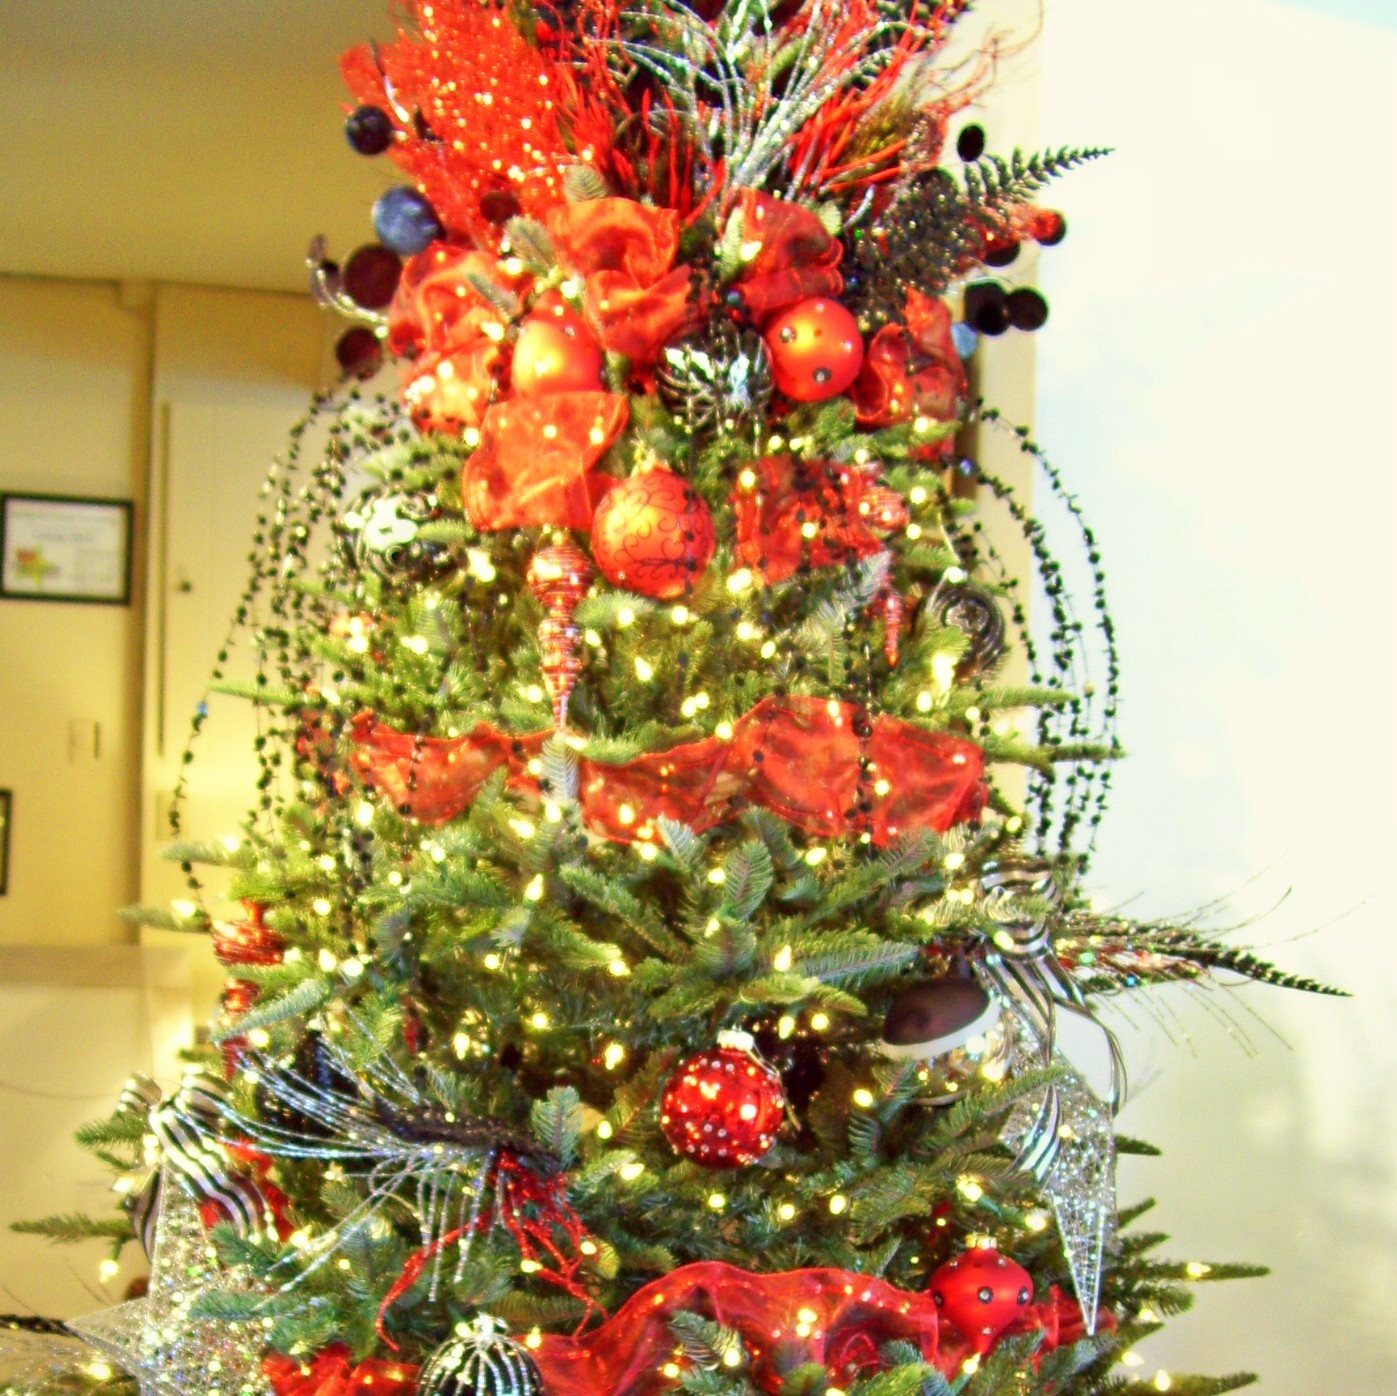 Brentwood TN Christmas Tree Tour | The Brentwood TN Guide